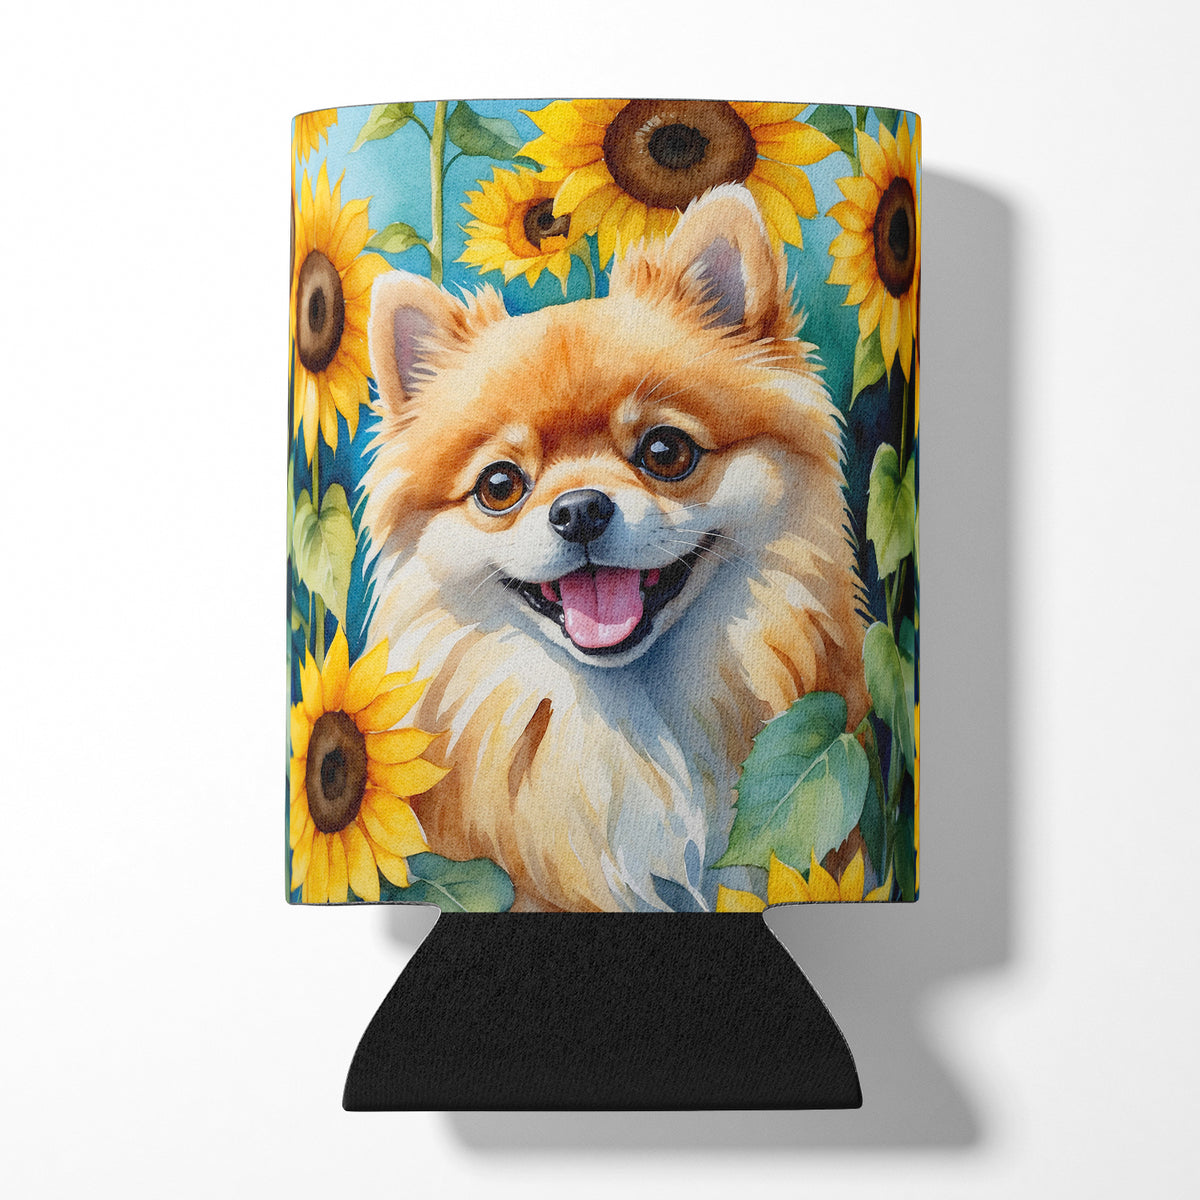 Buy this Pomeranian in Sunflowers Can or Bottle Hugger